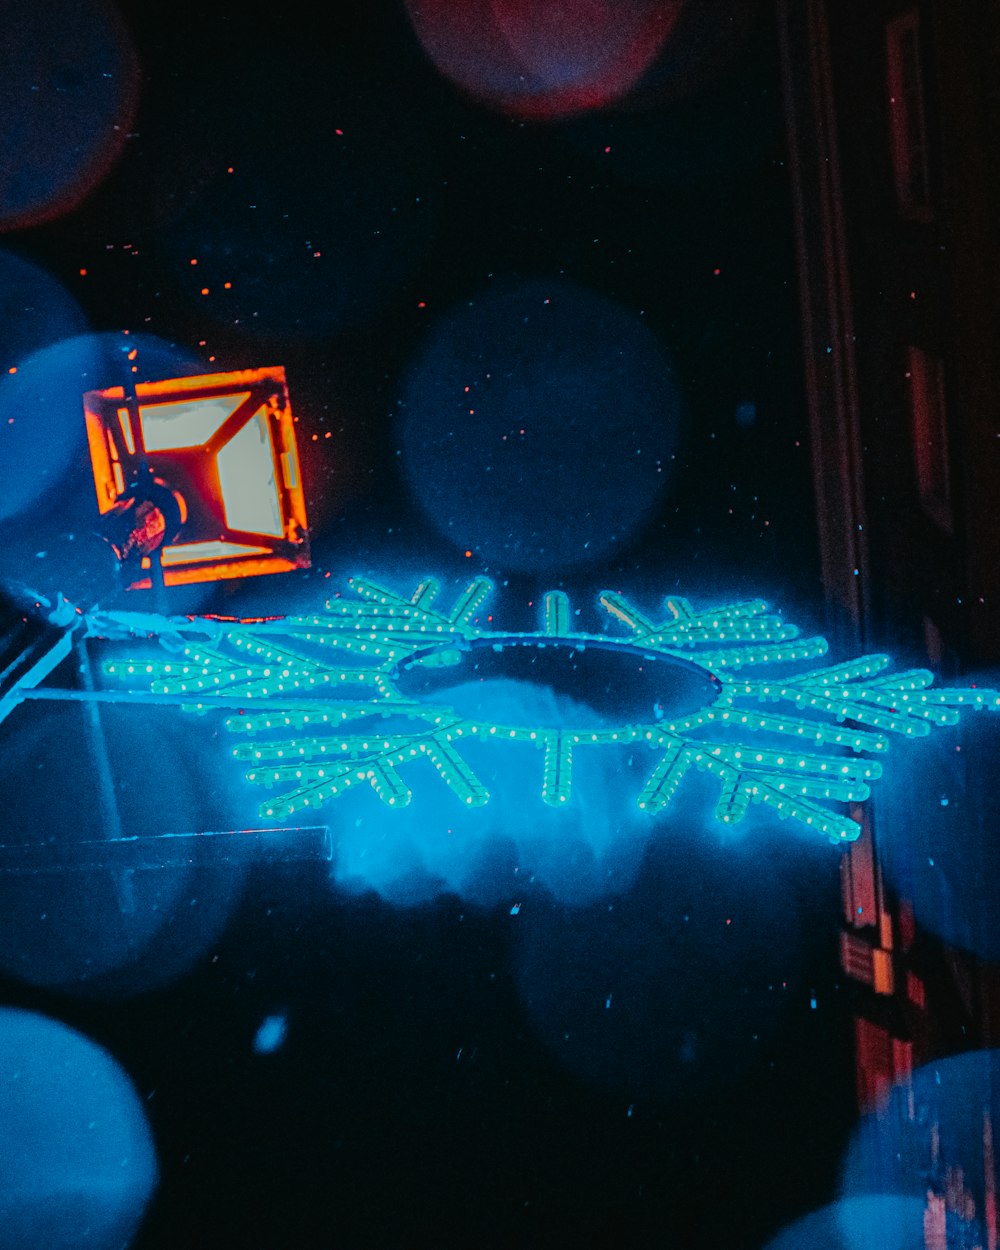 a neon snowflake is shown in the dark